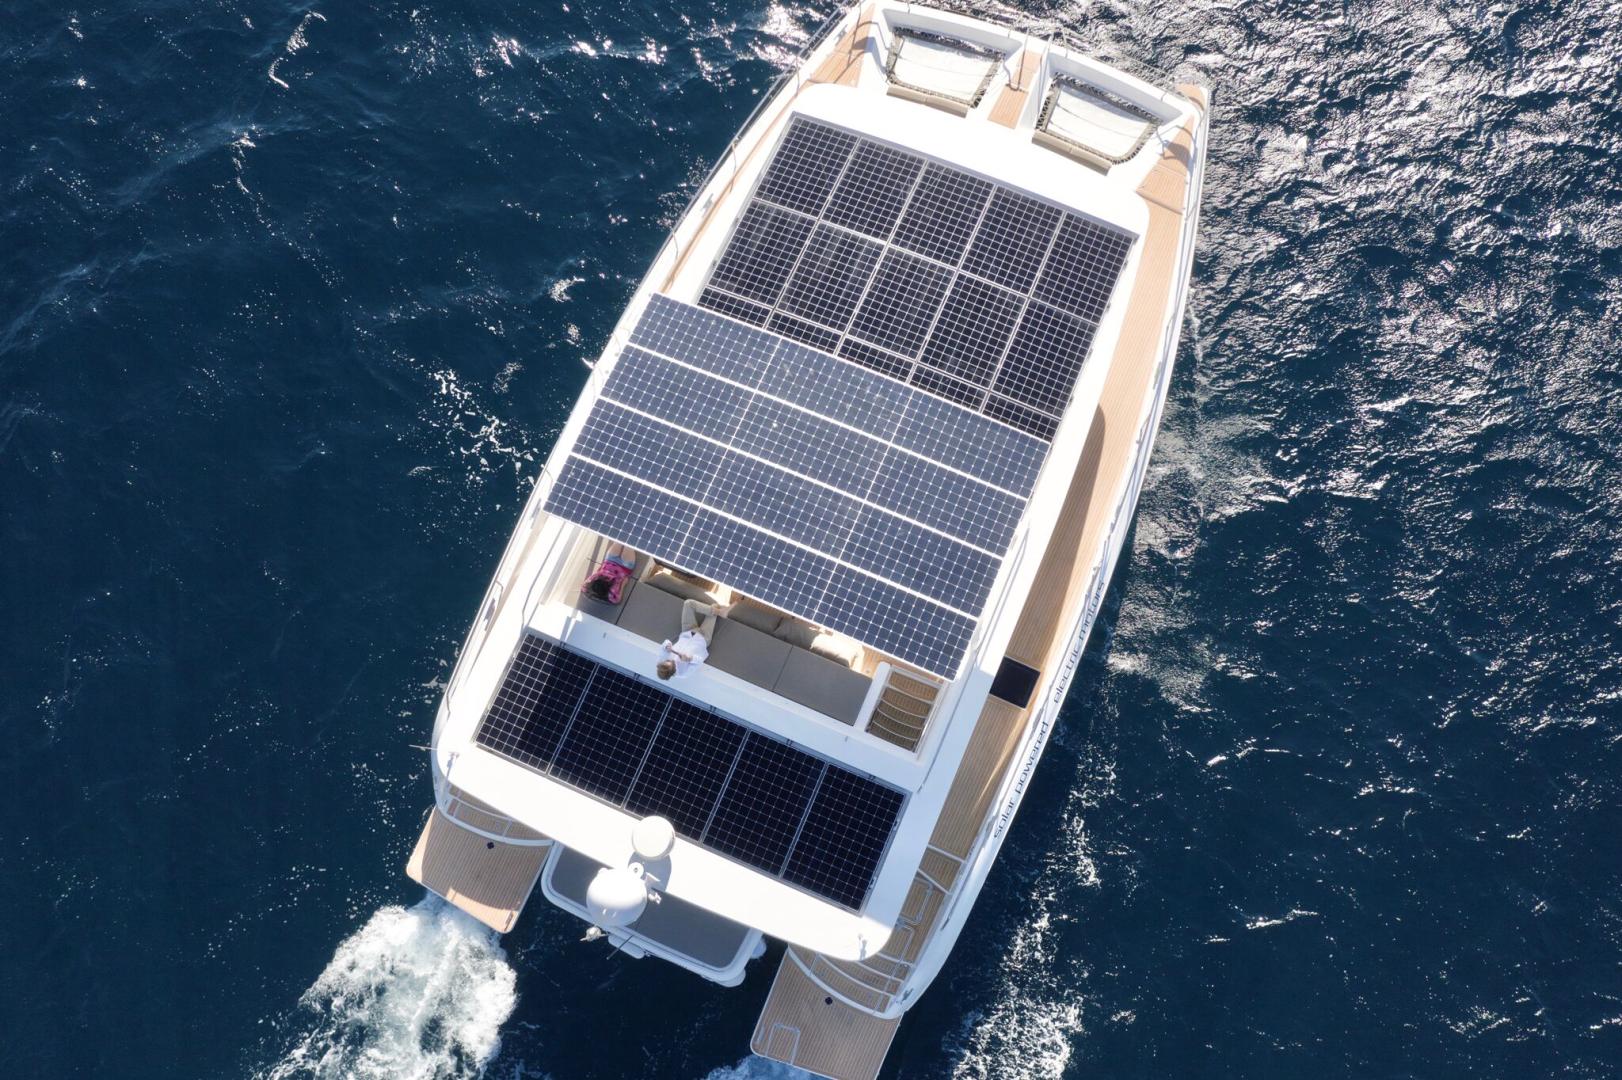 Silent 55: use of solar panels
sets green new trends in modern yachting